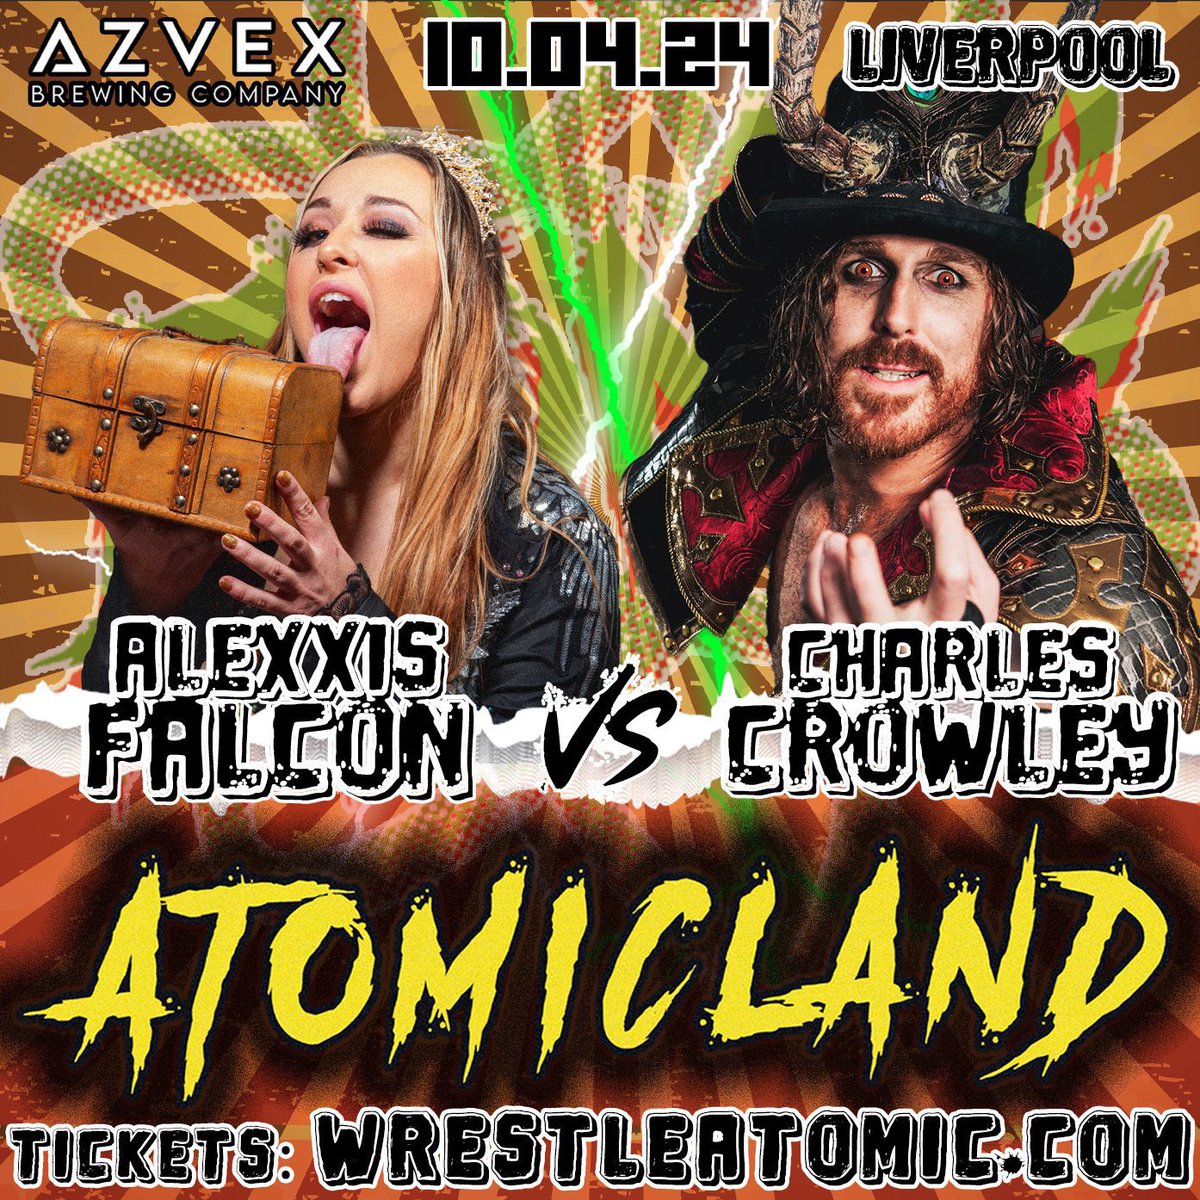 She’s been on a warpath for perfection, but collecting the hair of her fellow women has not solved @alexxisfalcon’s problem at @WrestleAtomic with her magic mirror! Are the luscious locks of @CrowleyCarnival the key to being the fairest in all the land? 👑🧊☕️ xoxo